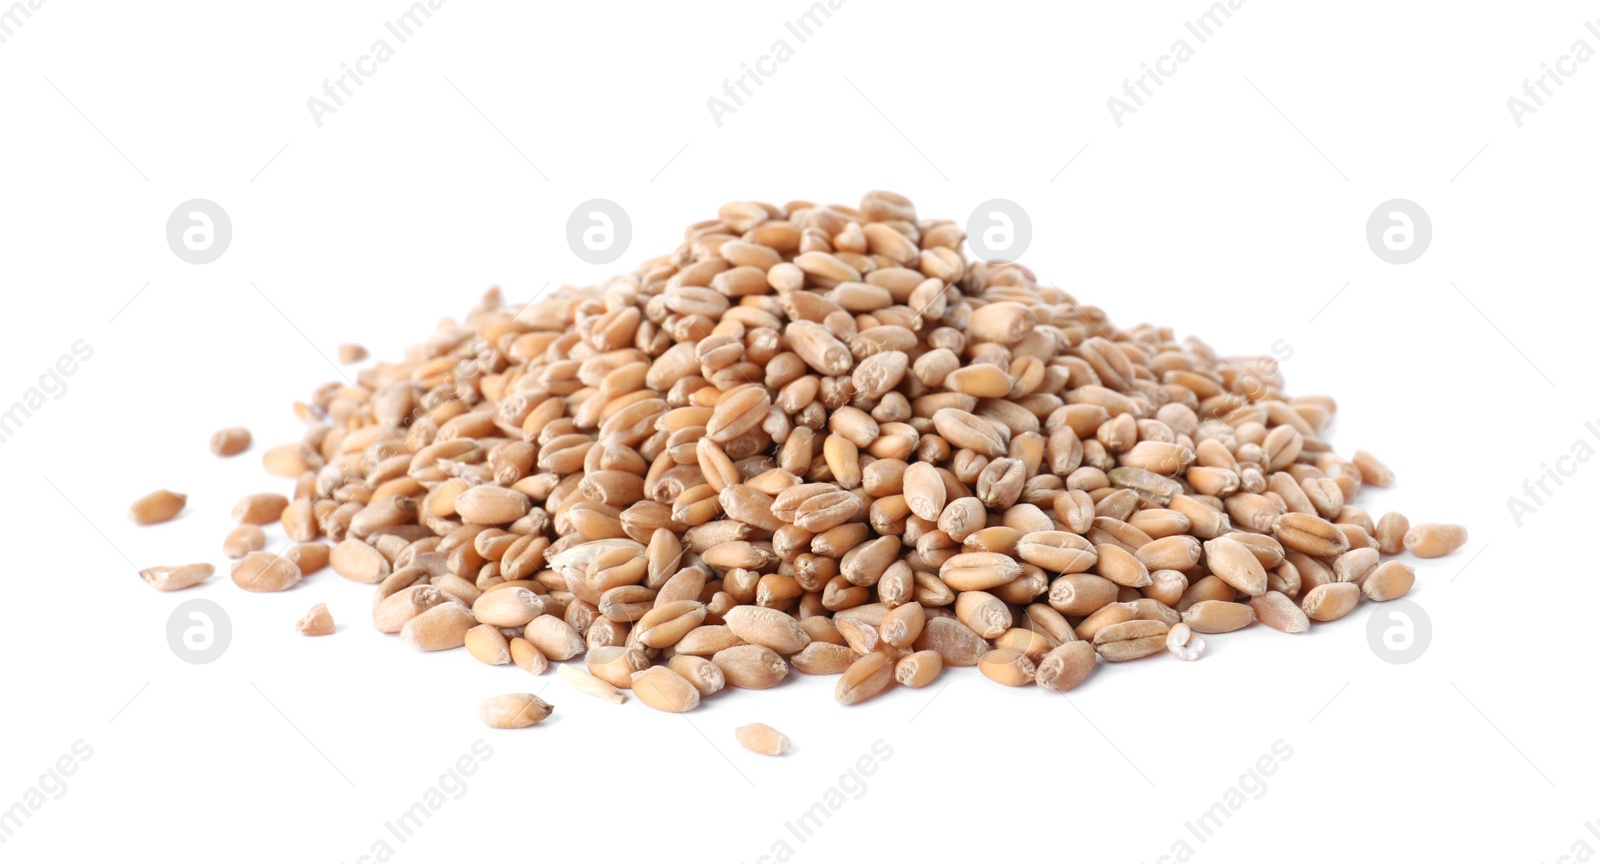 Photo of Pile of wheat grains on white background. Cereal crop